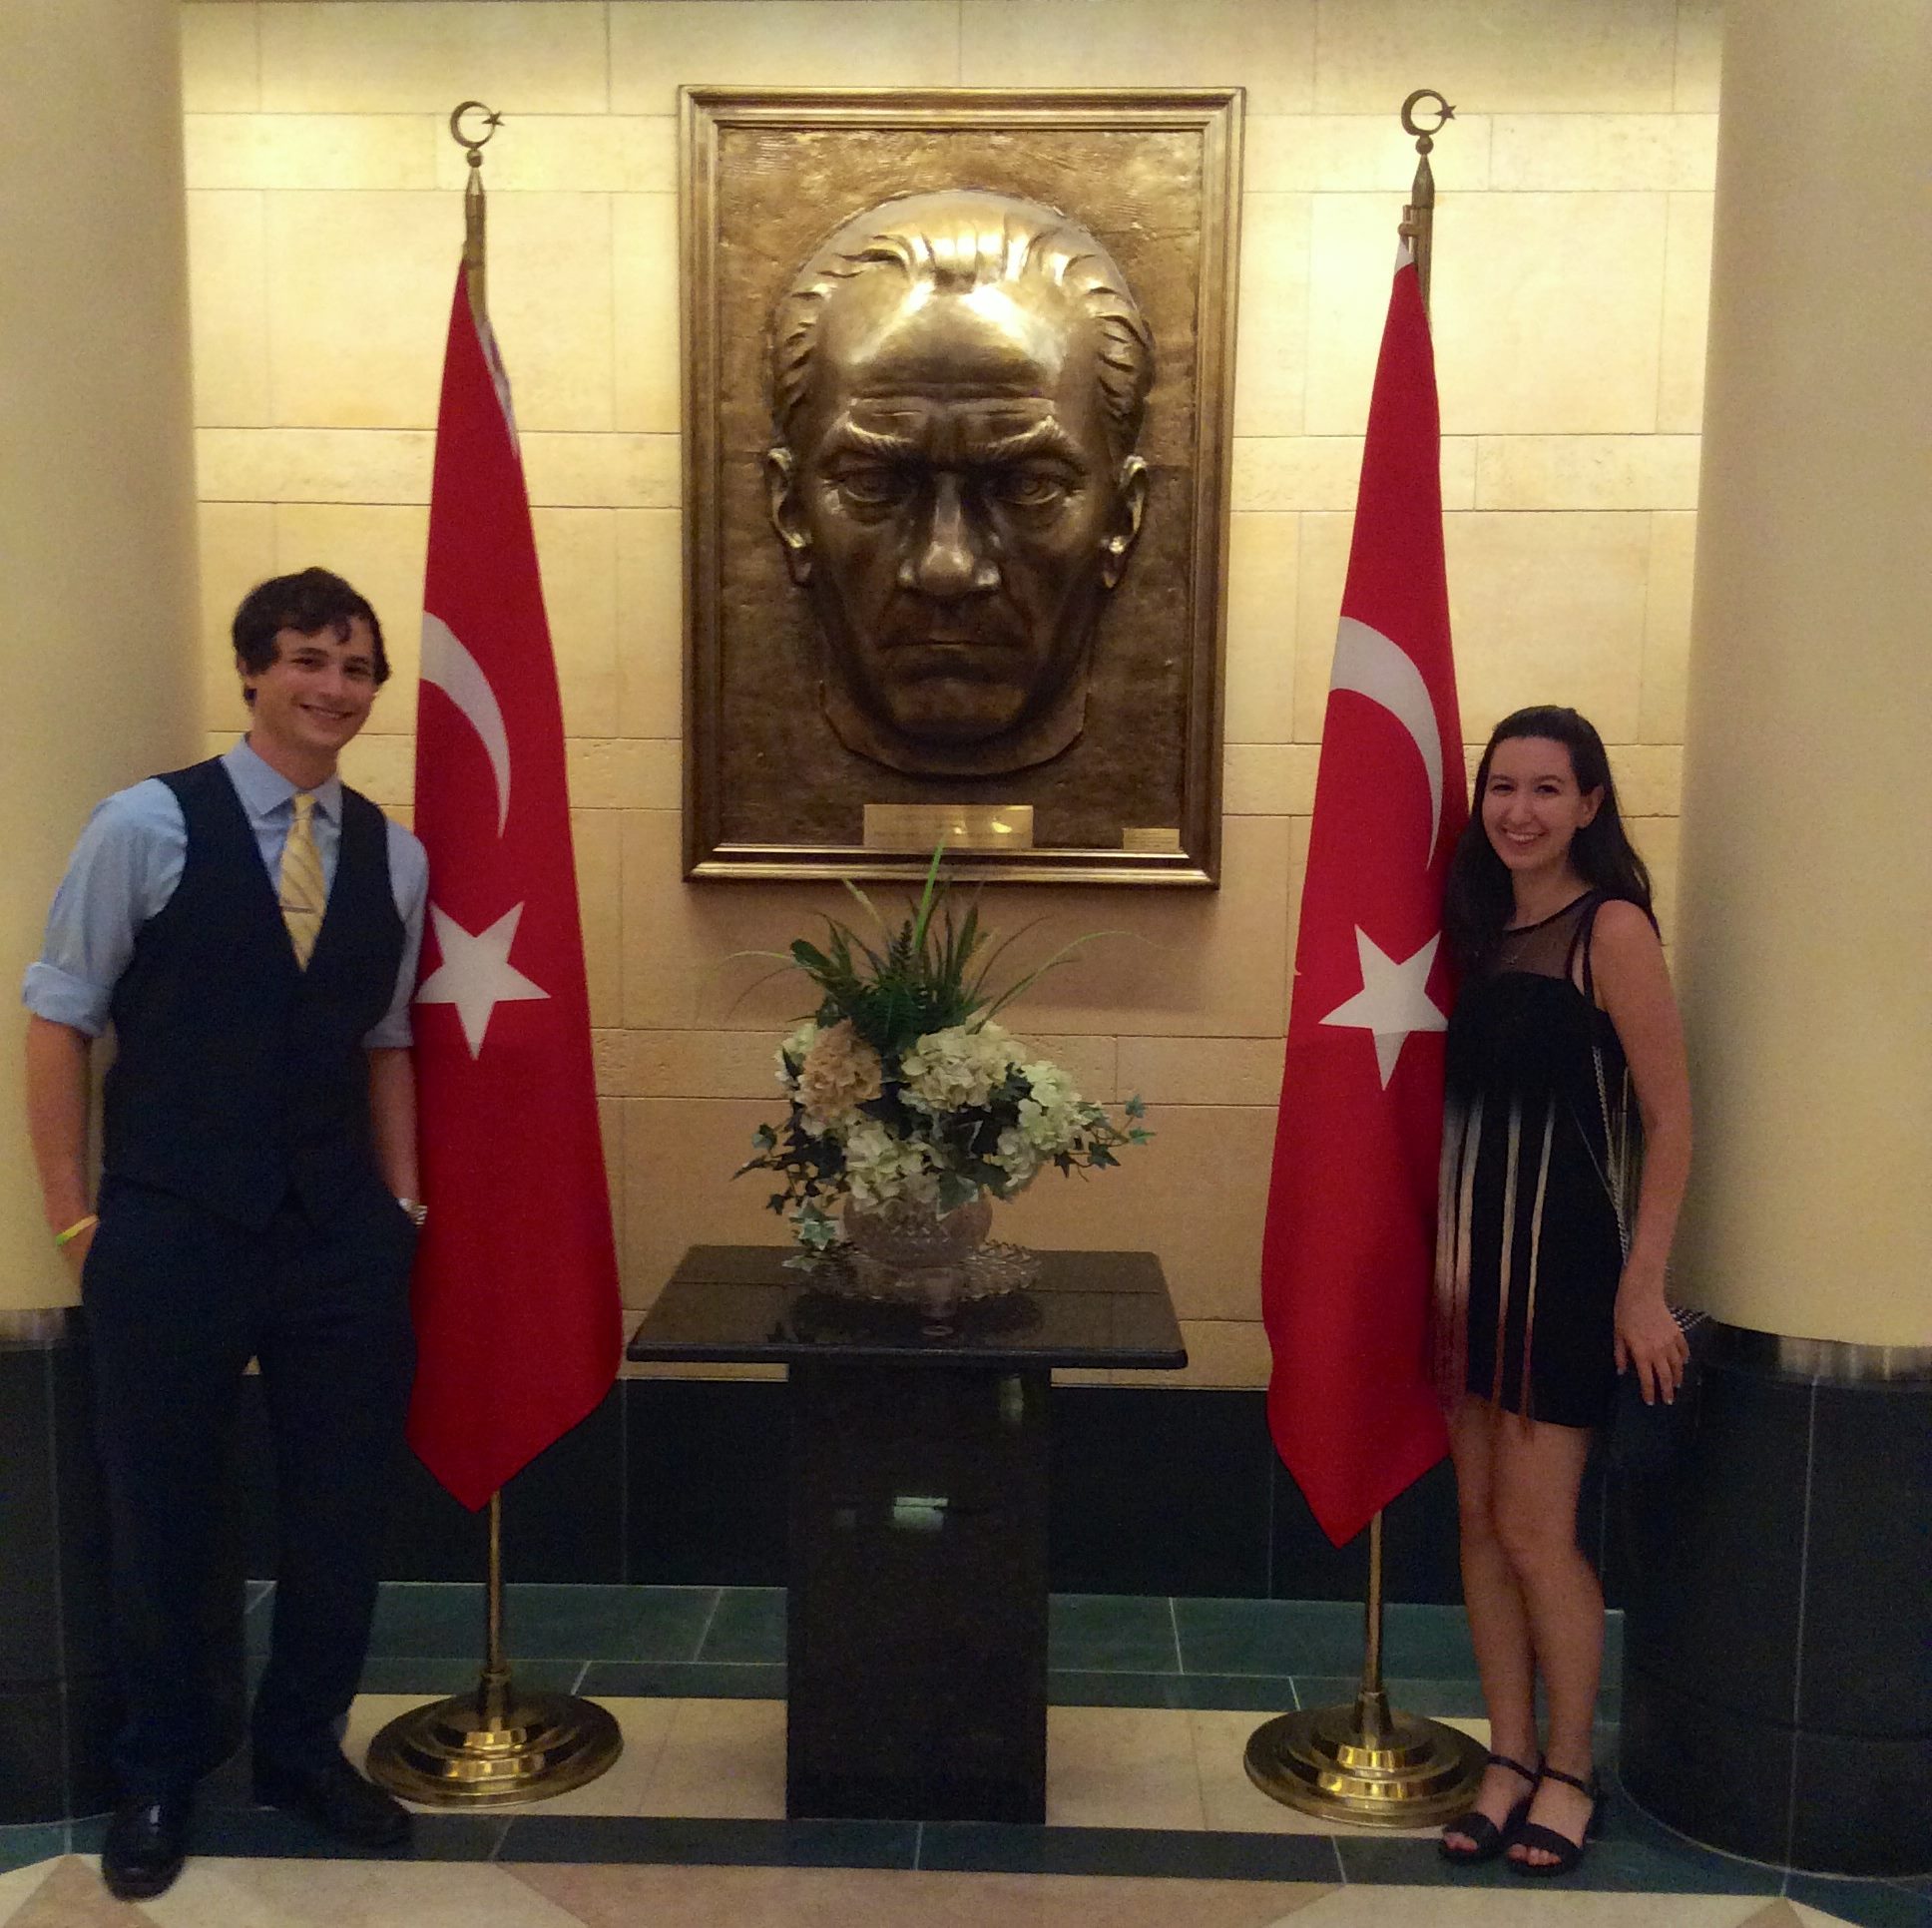 Evening at the Embassy of Turkey